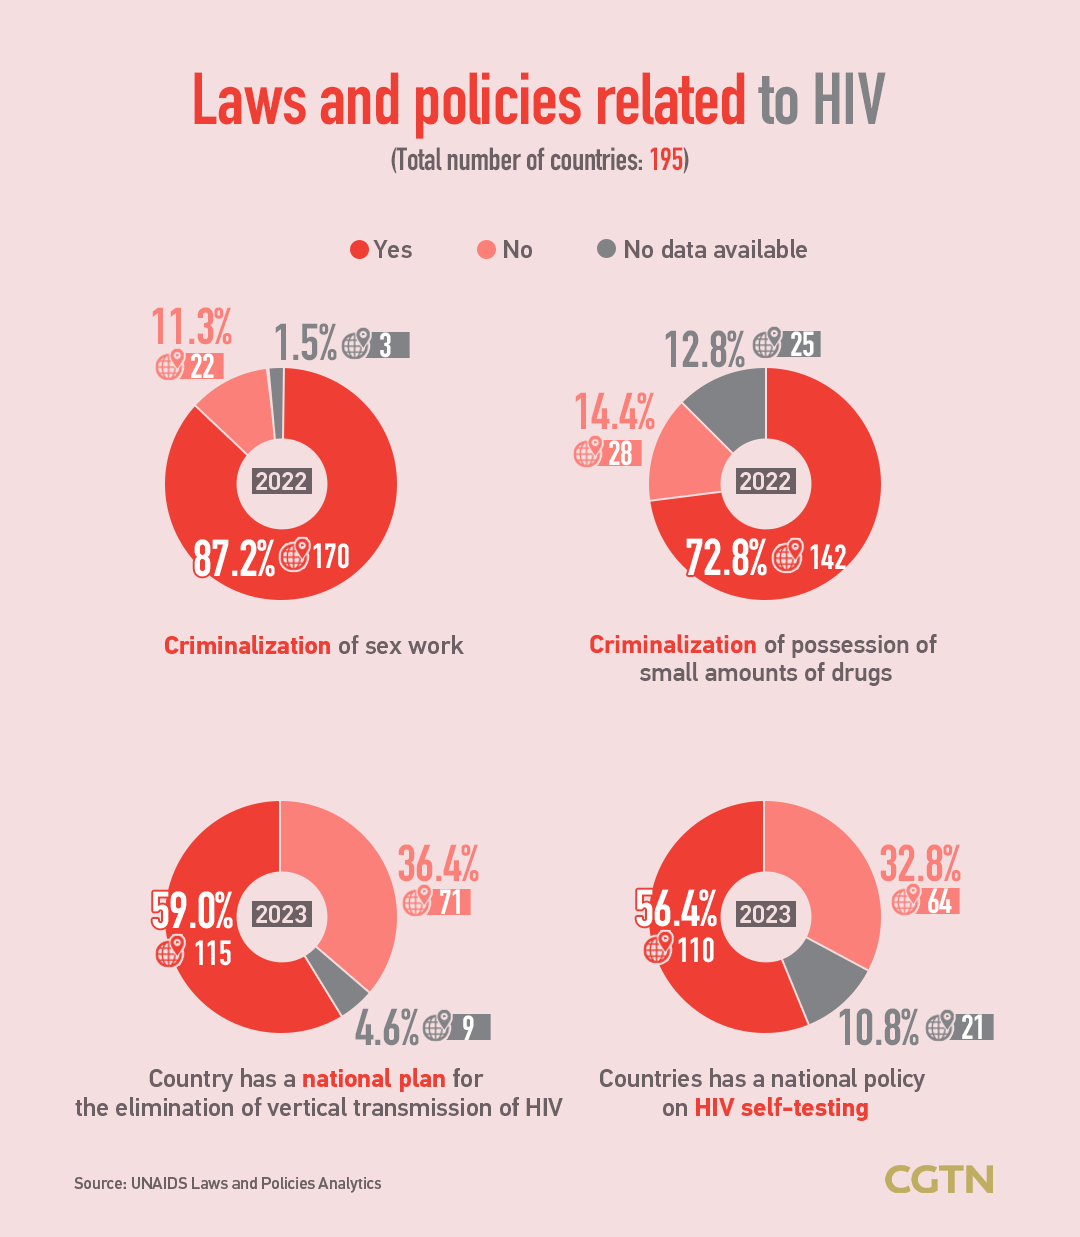 World AIDS Day: Communities lead the way in ending HIV by 2030